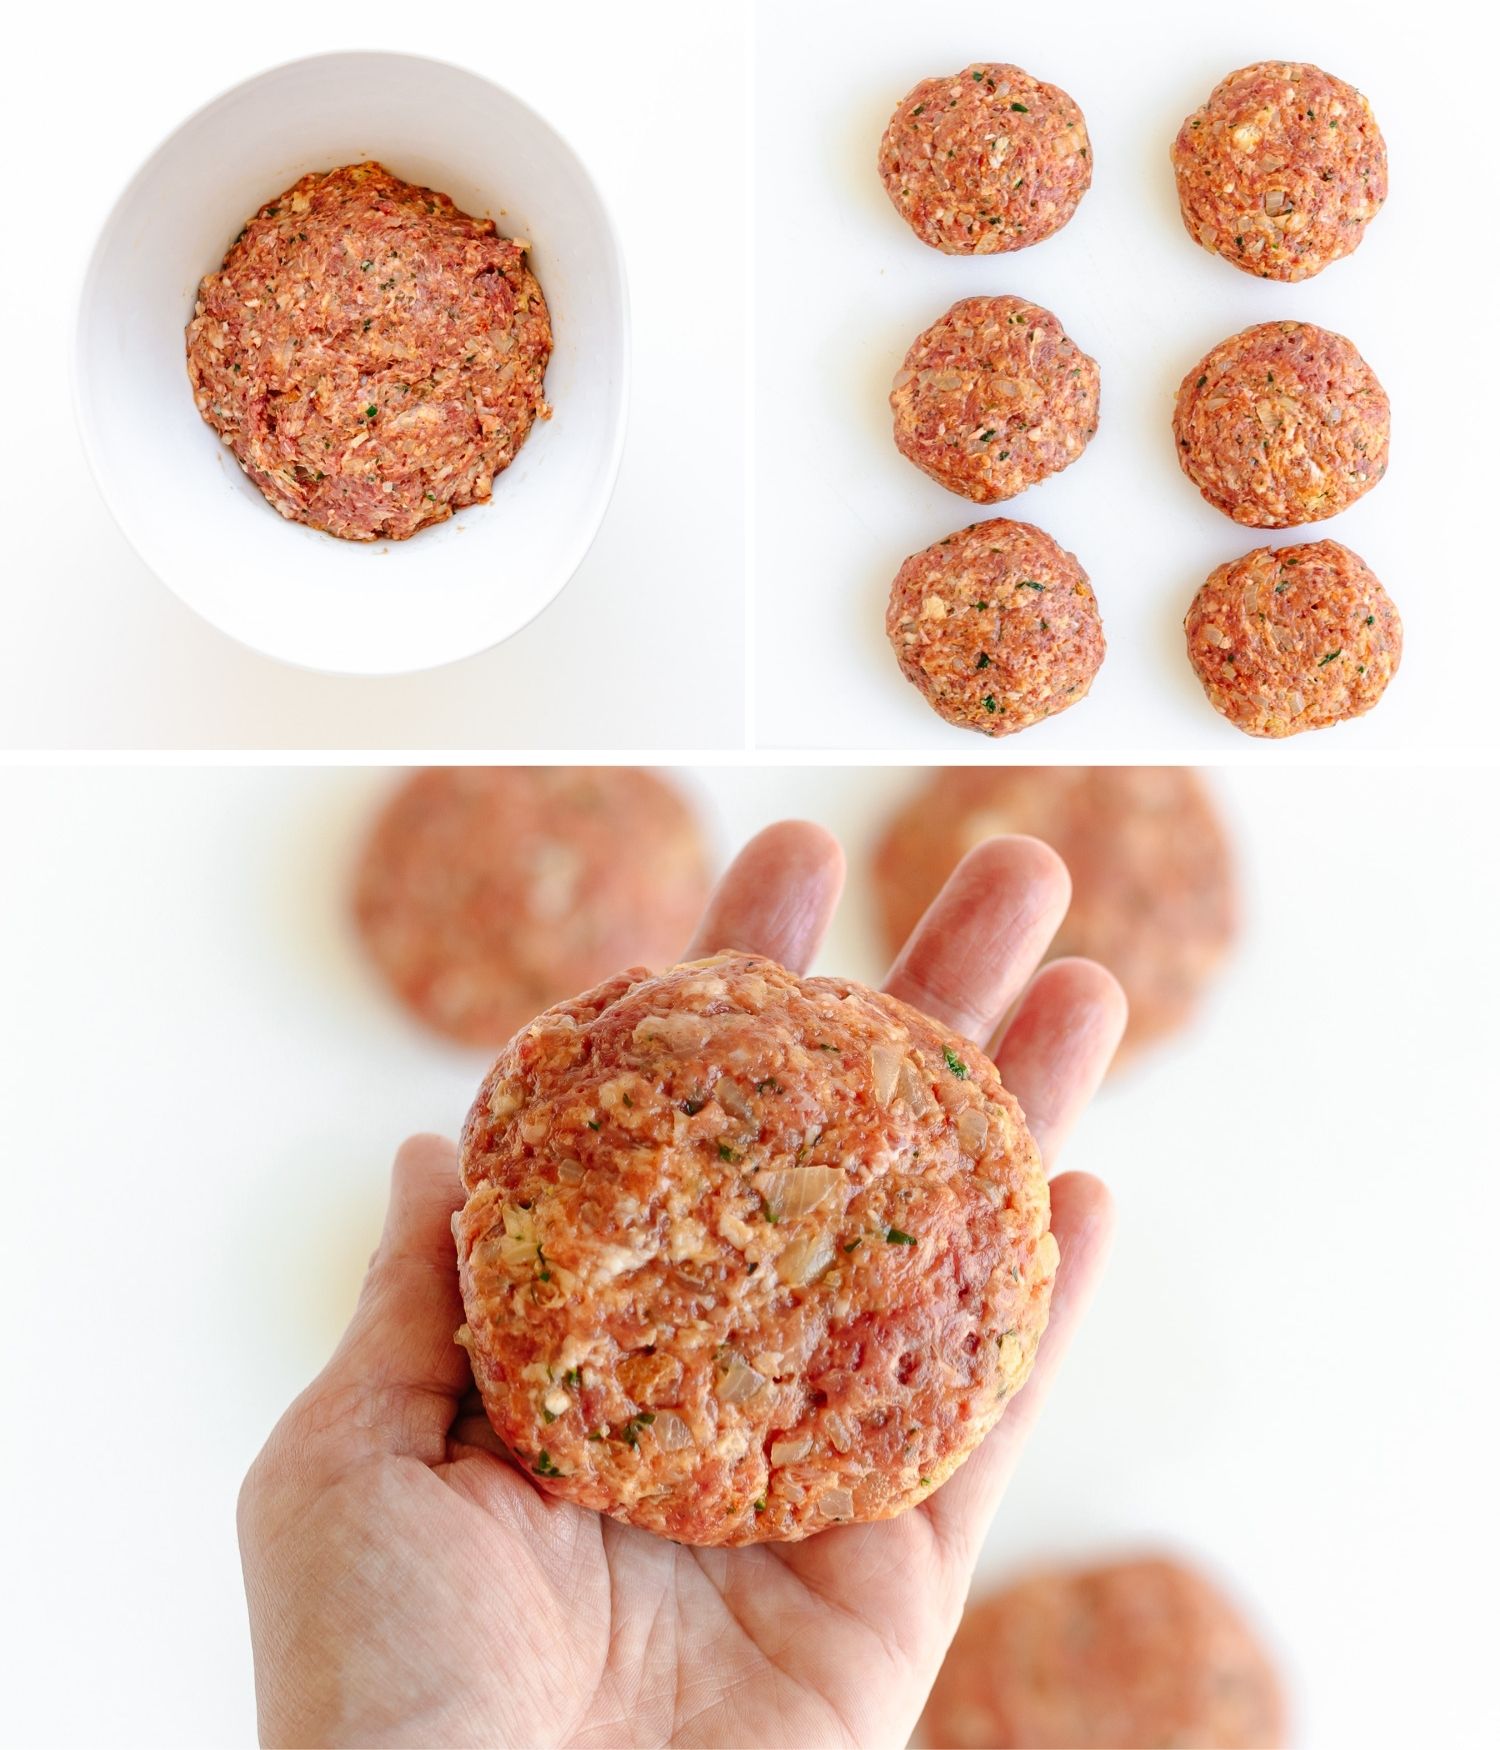 Collage showing frikadellen meat mixture combined in a bowl and shaped into six meat patties.